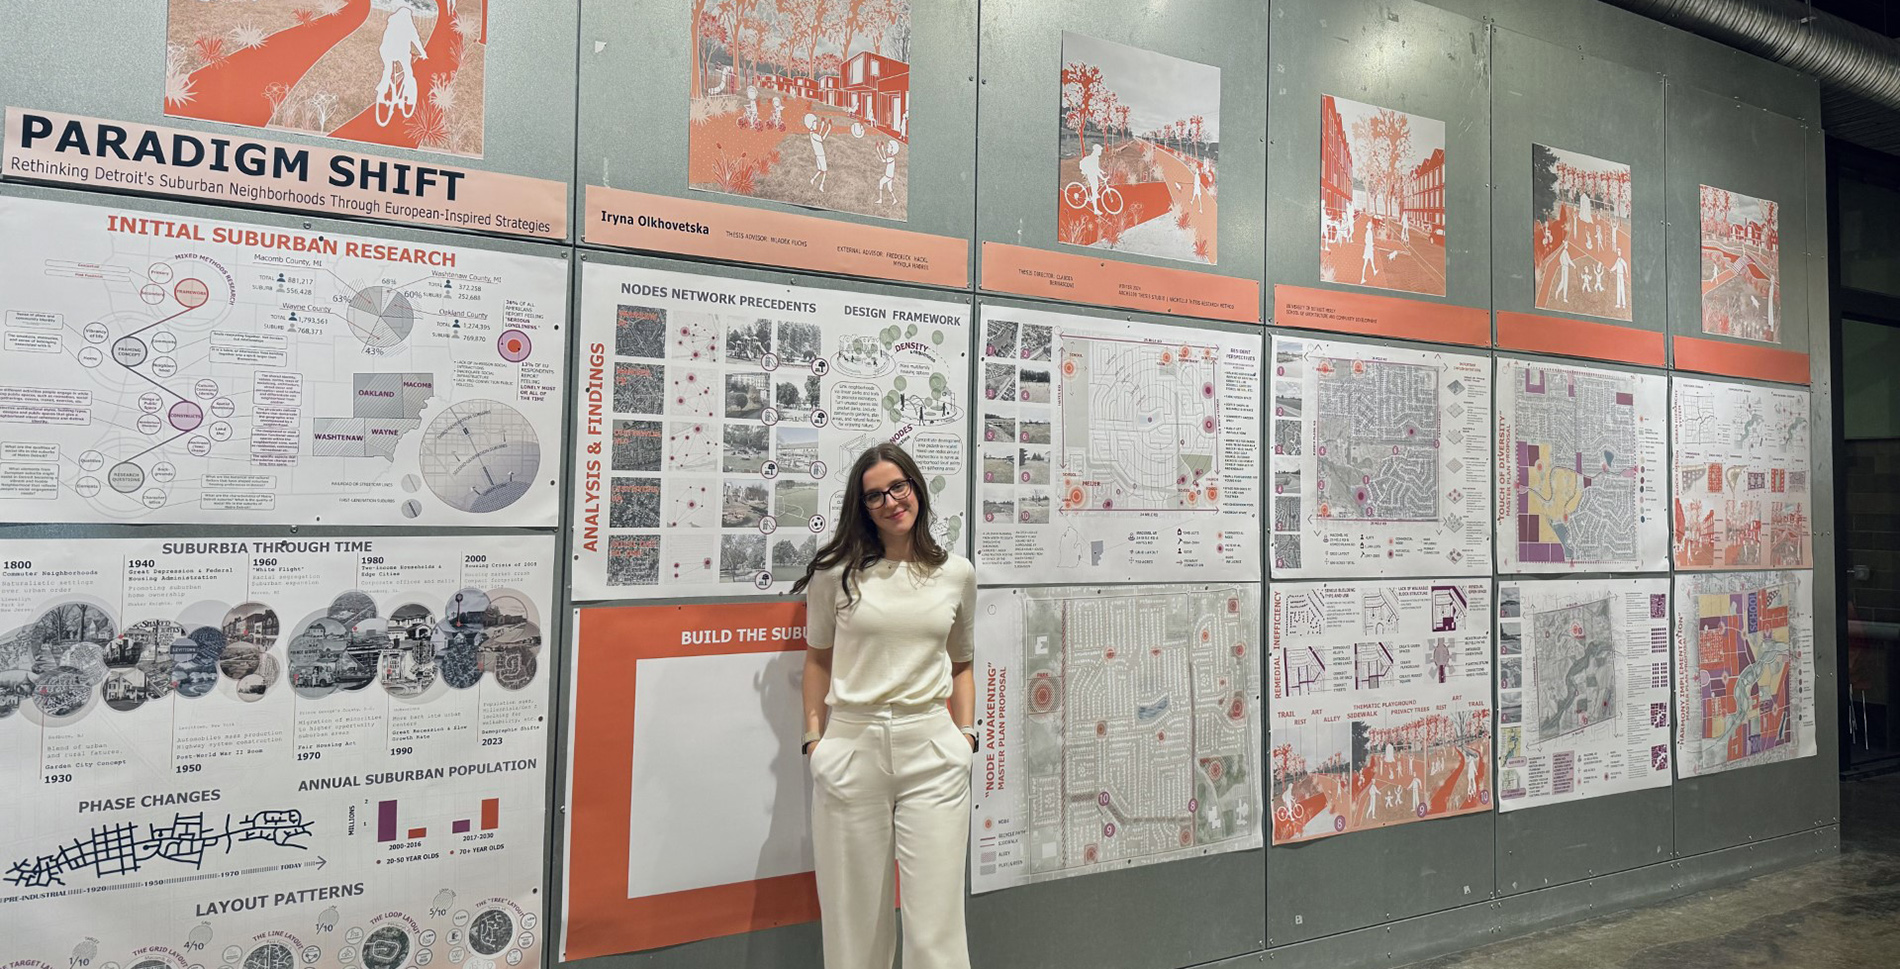 Iryna Olkhovetska poses in front of her thesis presentation, titled "Paradigm Shift: Rethinking the Notion of Detroit's Suburban Neighborhoods by Exploring European-Inspired Design Strategies." 